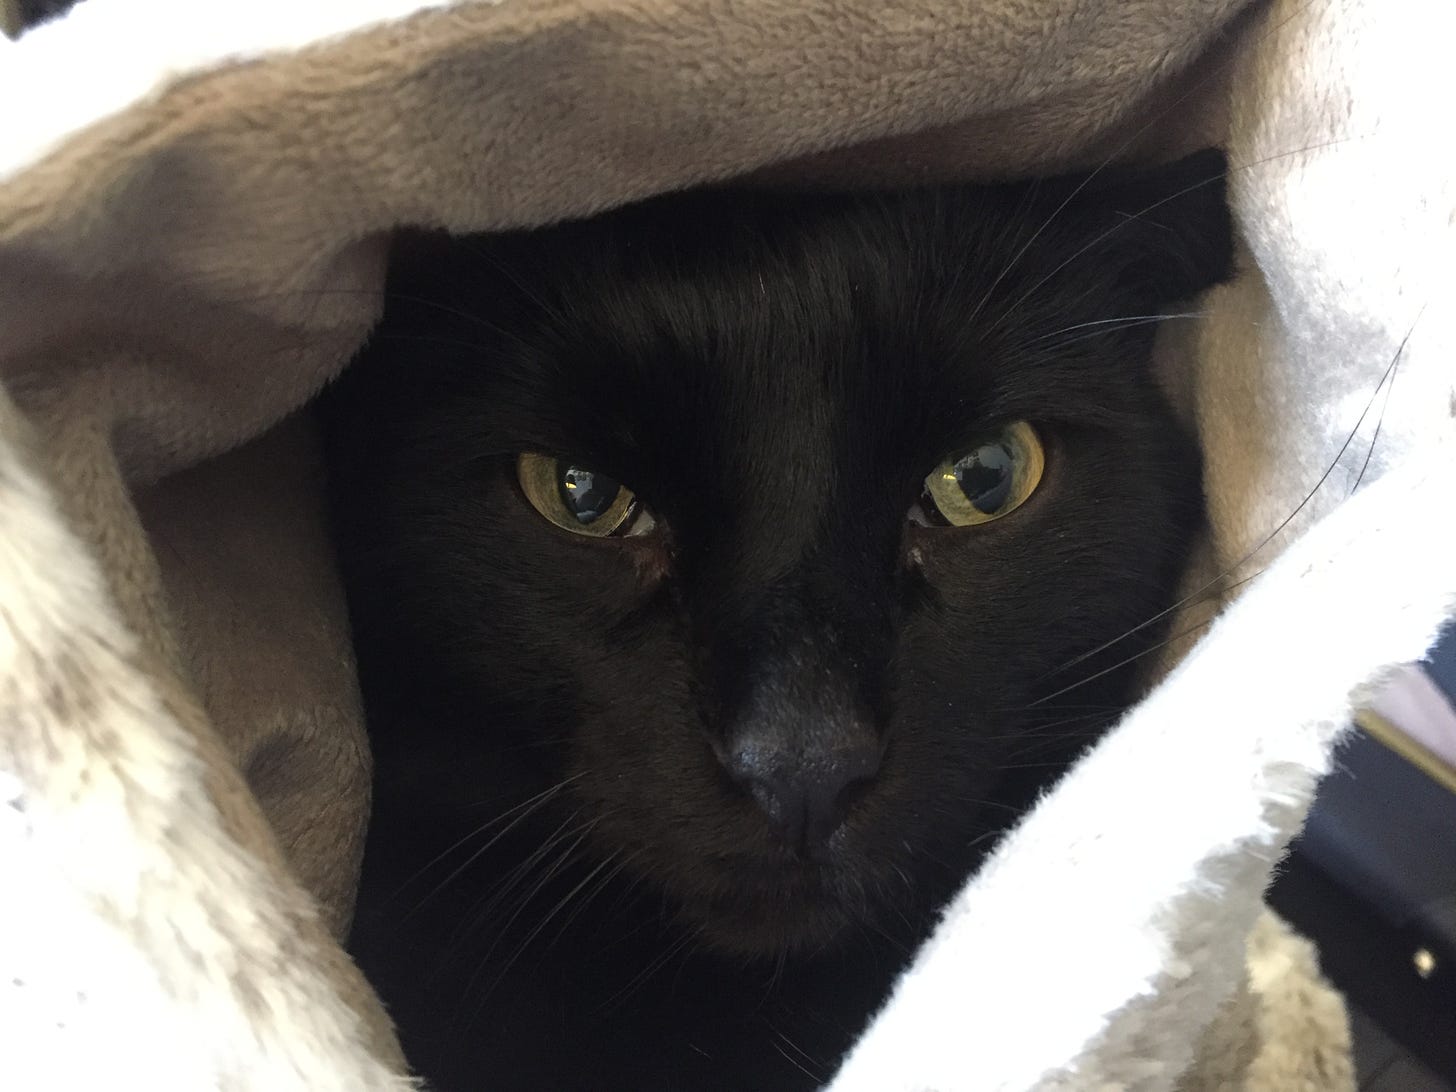 A black cat with green eyes swaddled in a blanket.